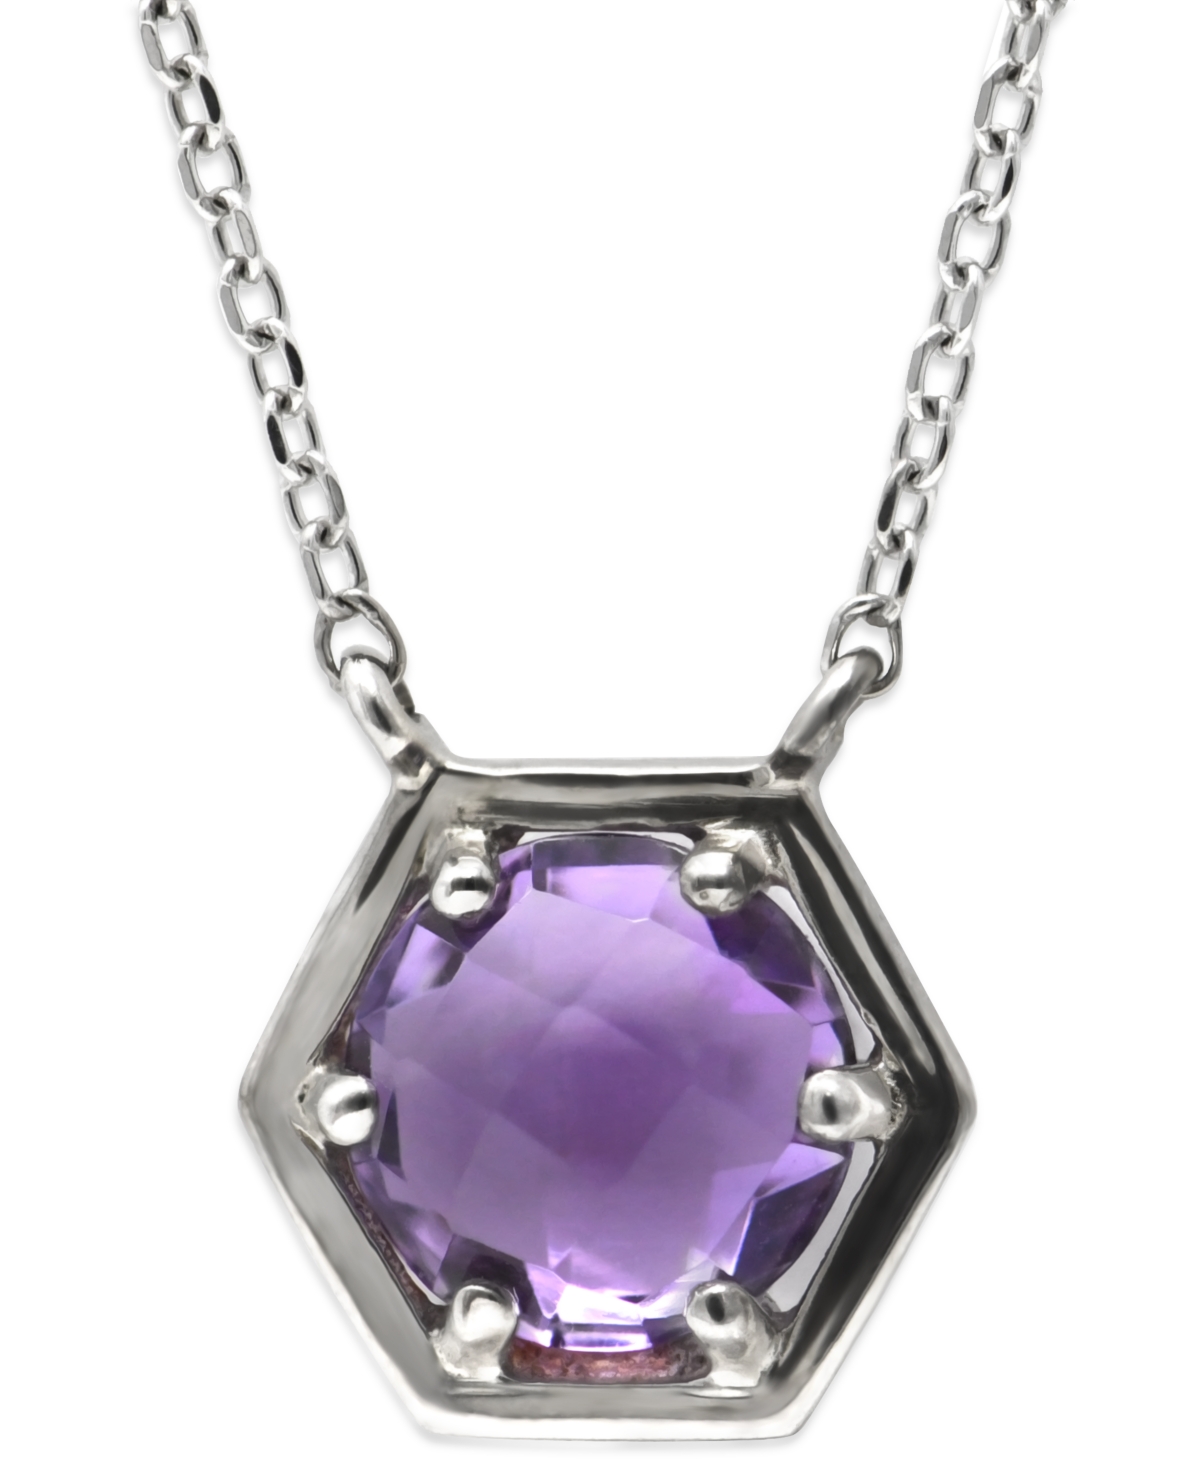 Jac + Jo By Anzie Jac & Jo by Anzie Amethyst Solitaire Pendant Necklace (1-1/3 ct. t.w.) in Sterling Silver, 16" + 1" extender